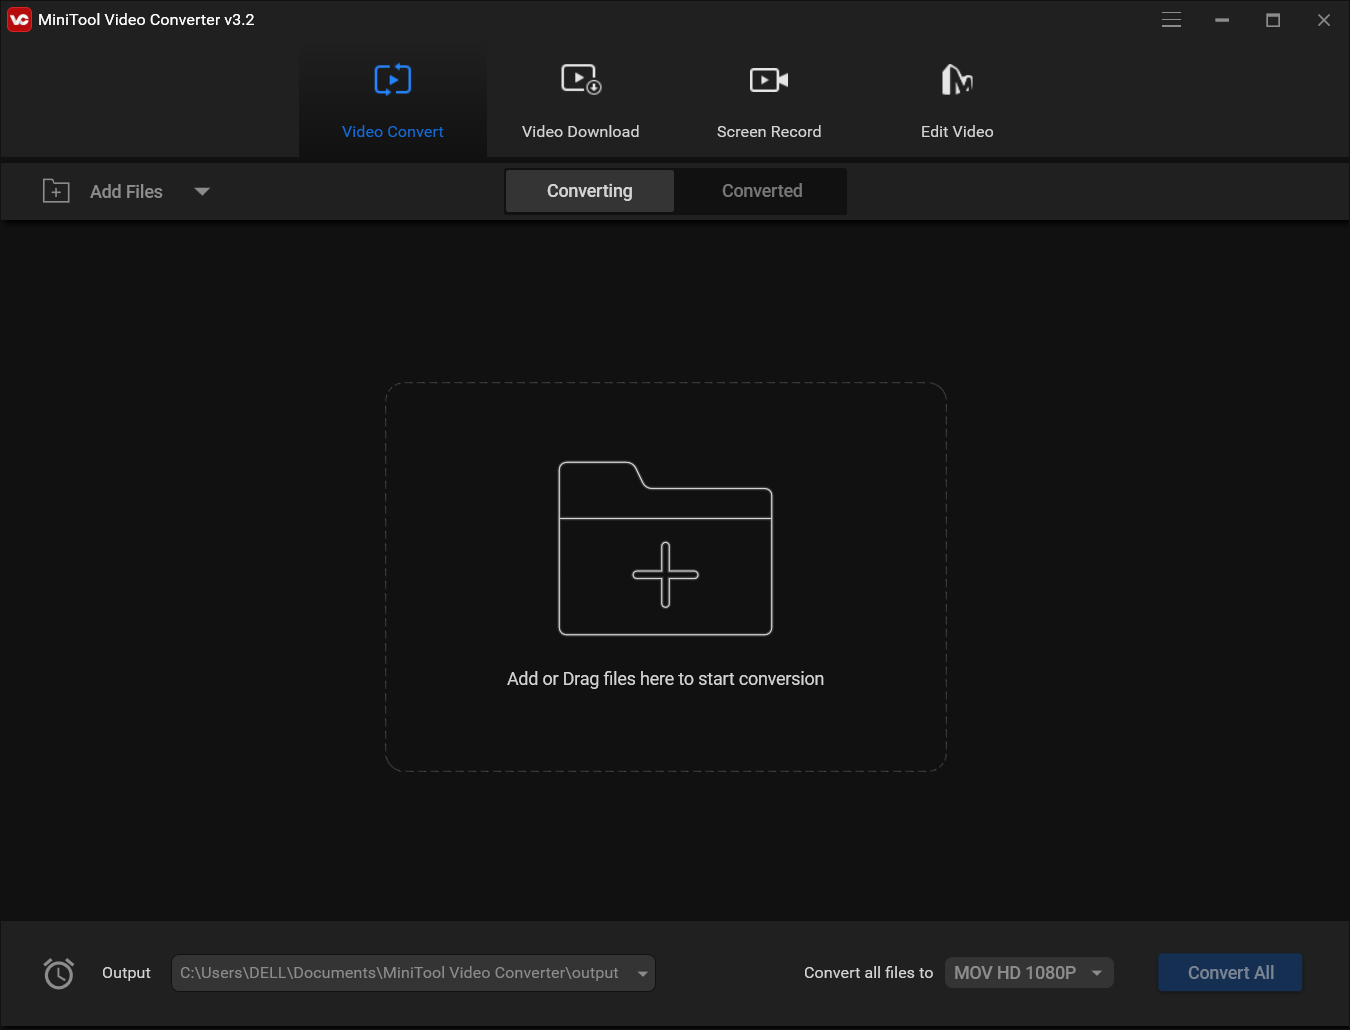 The interface of MiniTool Video Converter